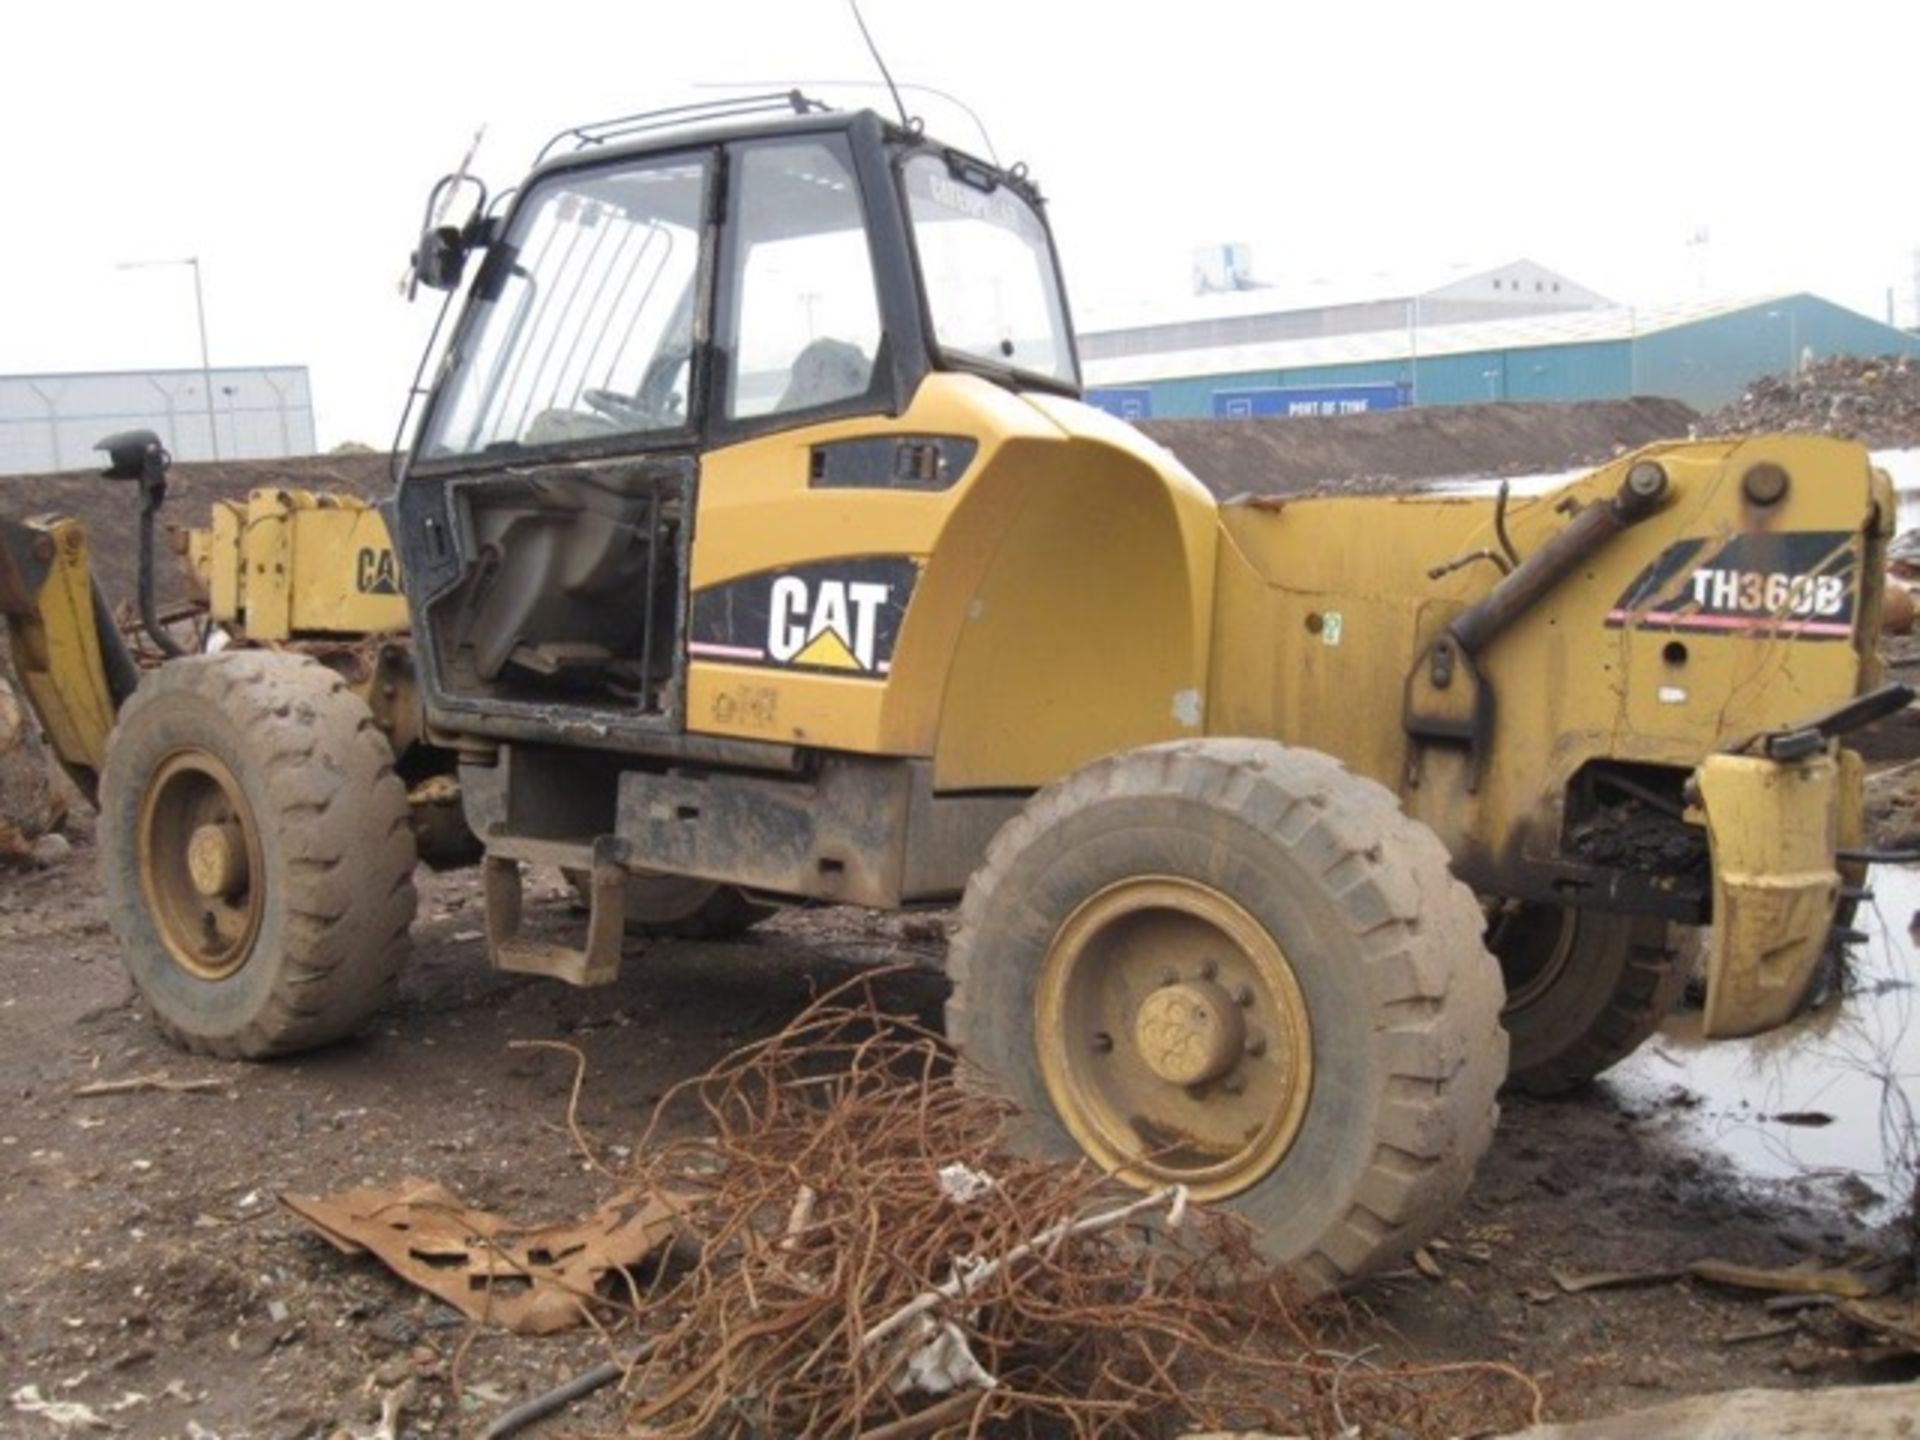 Solid Wheels and Tyres
4 x Michelin x mine tyres with foam filling on cat th360 wheel - Image 2 of 2